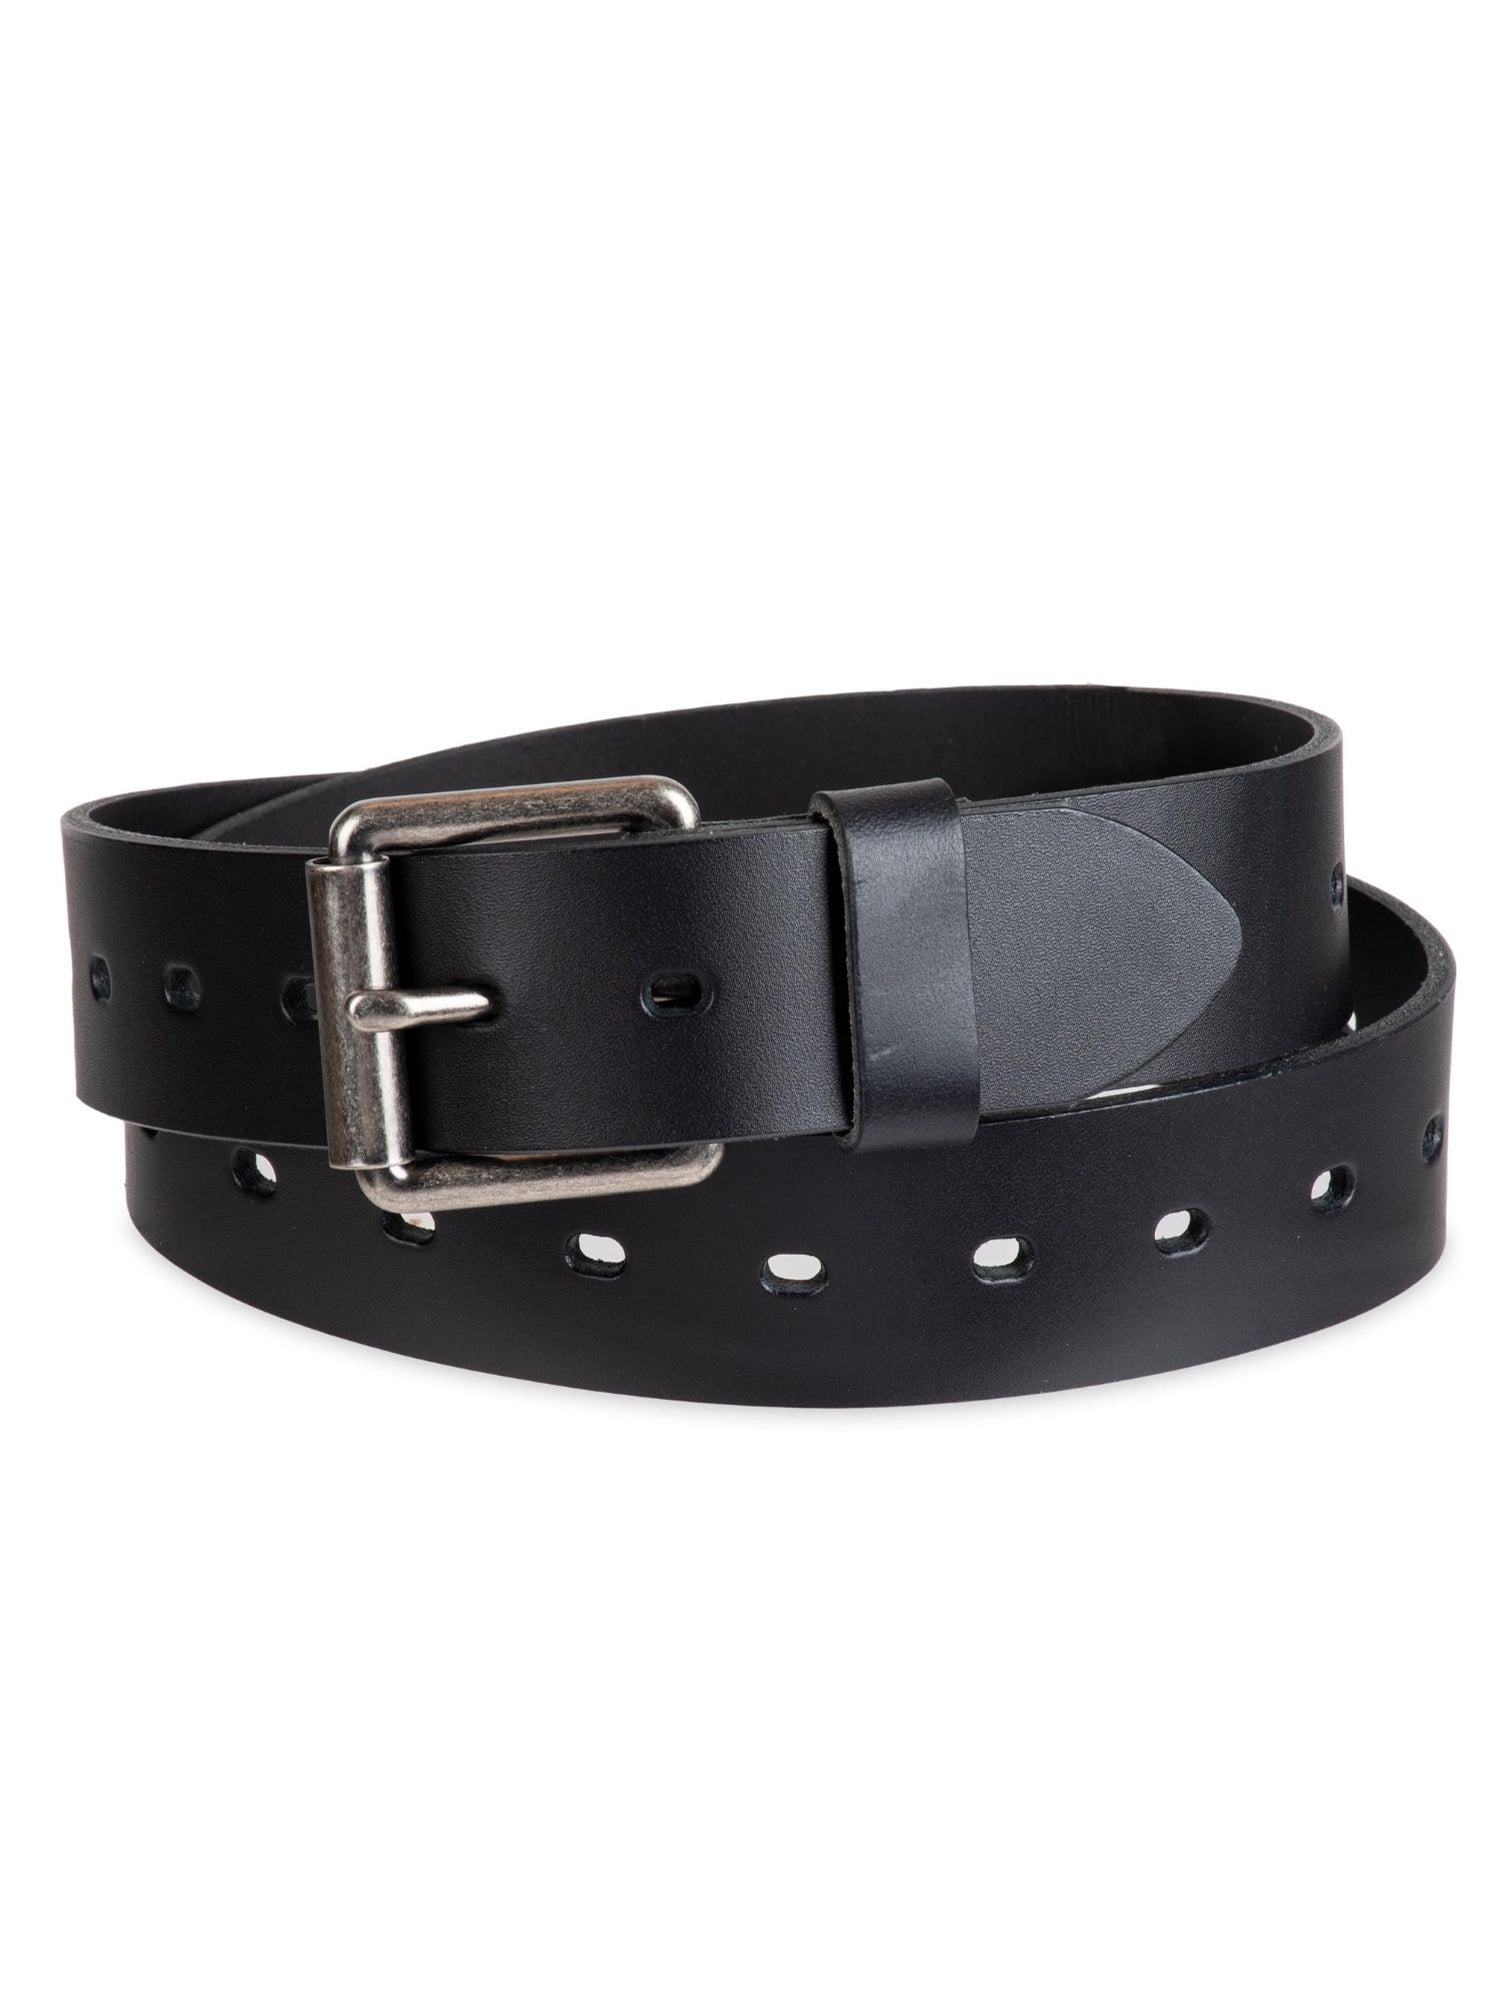 Genuine Dickies Men's Black Perforated Leather Belt With Big & Tall Sizes